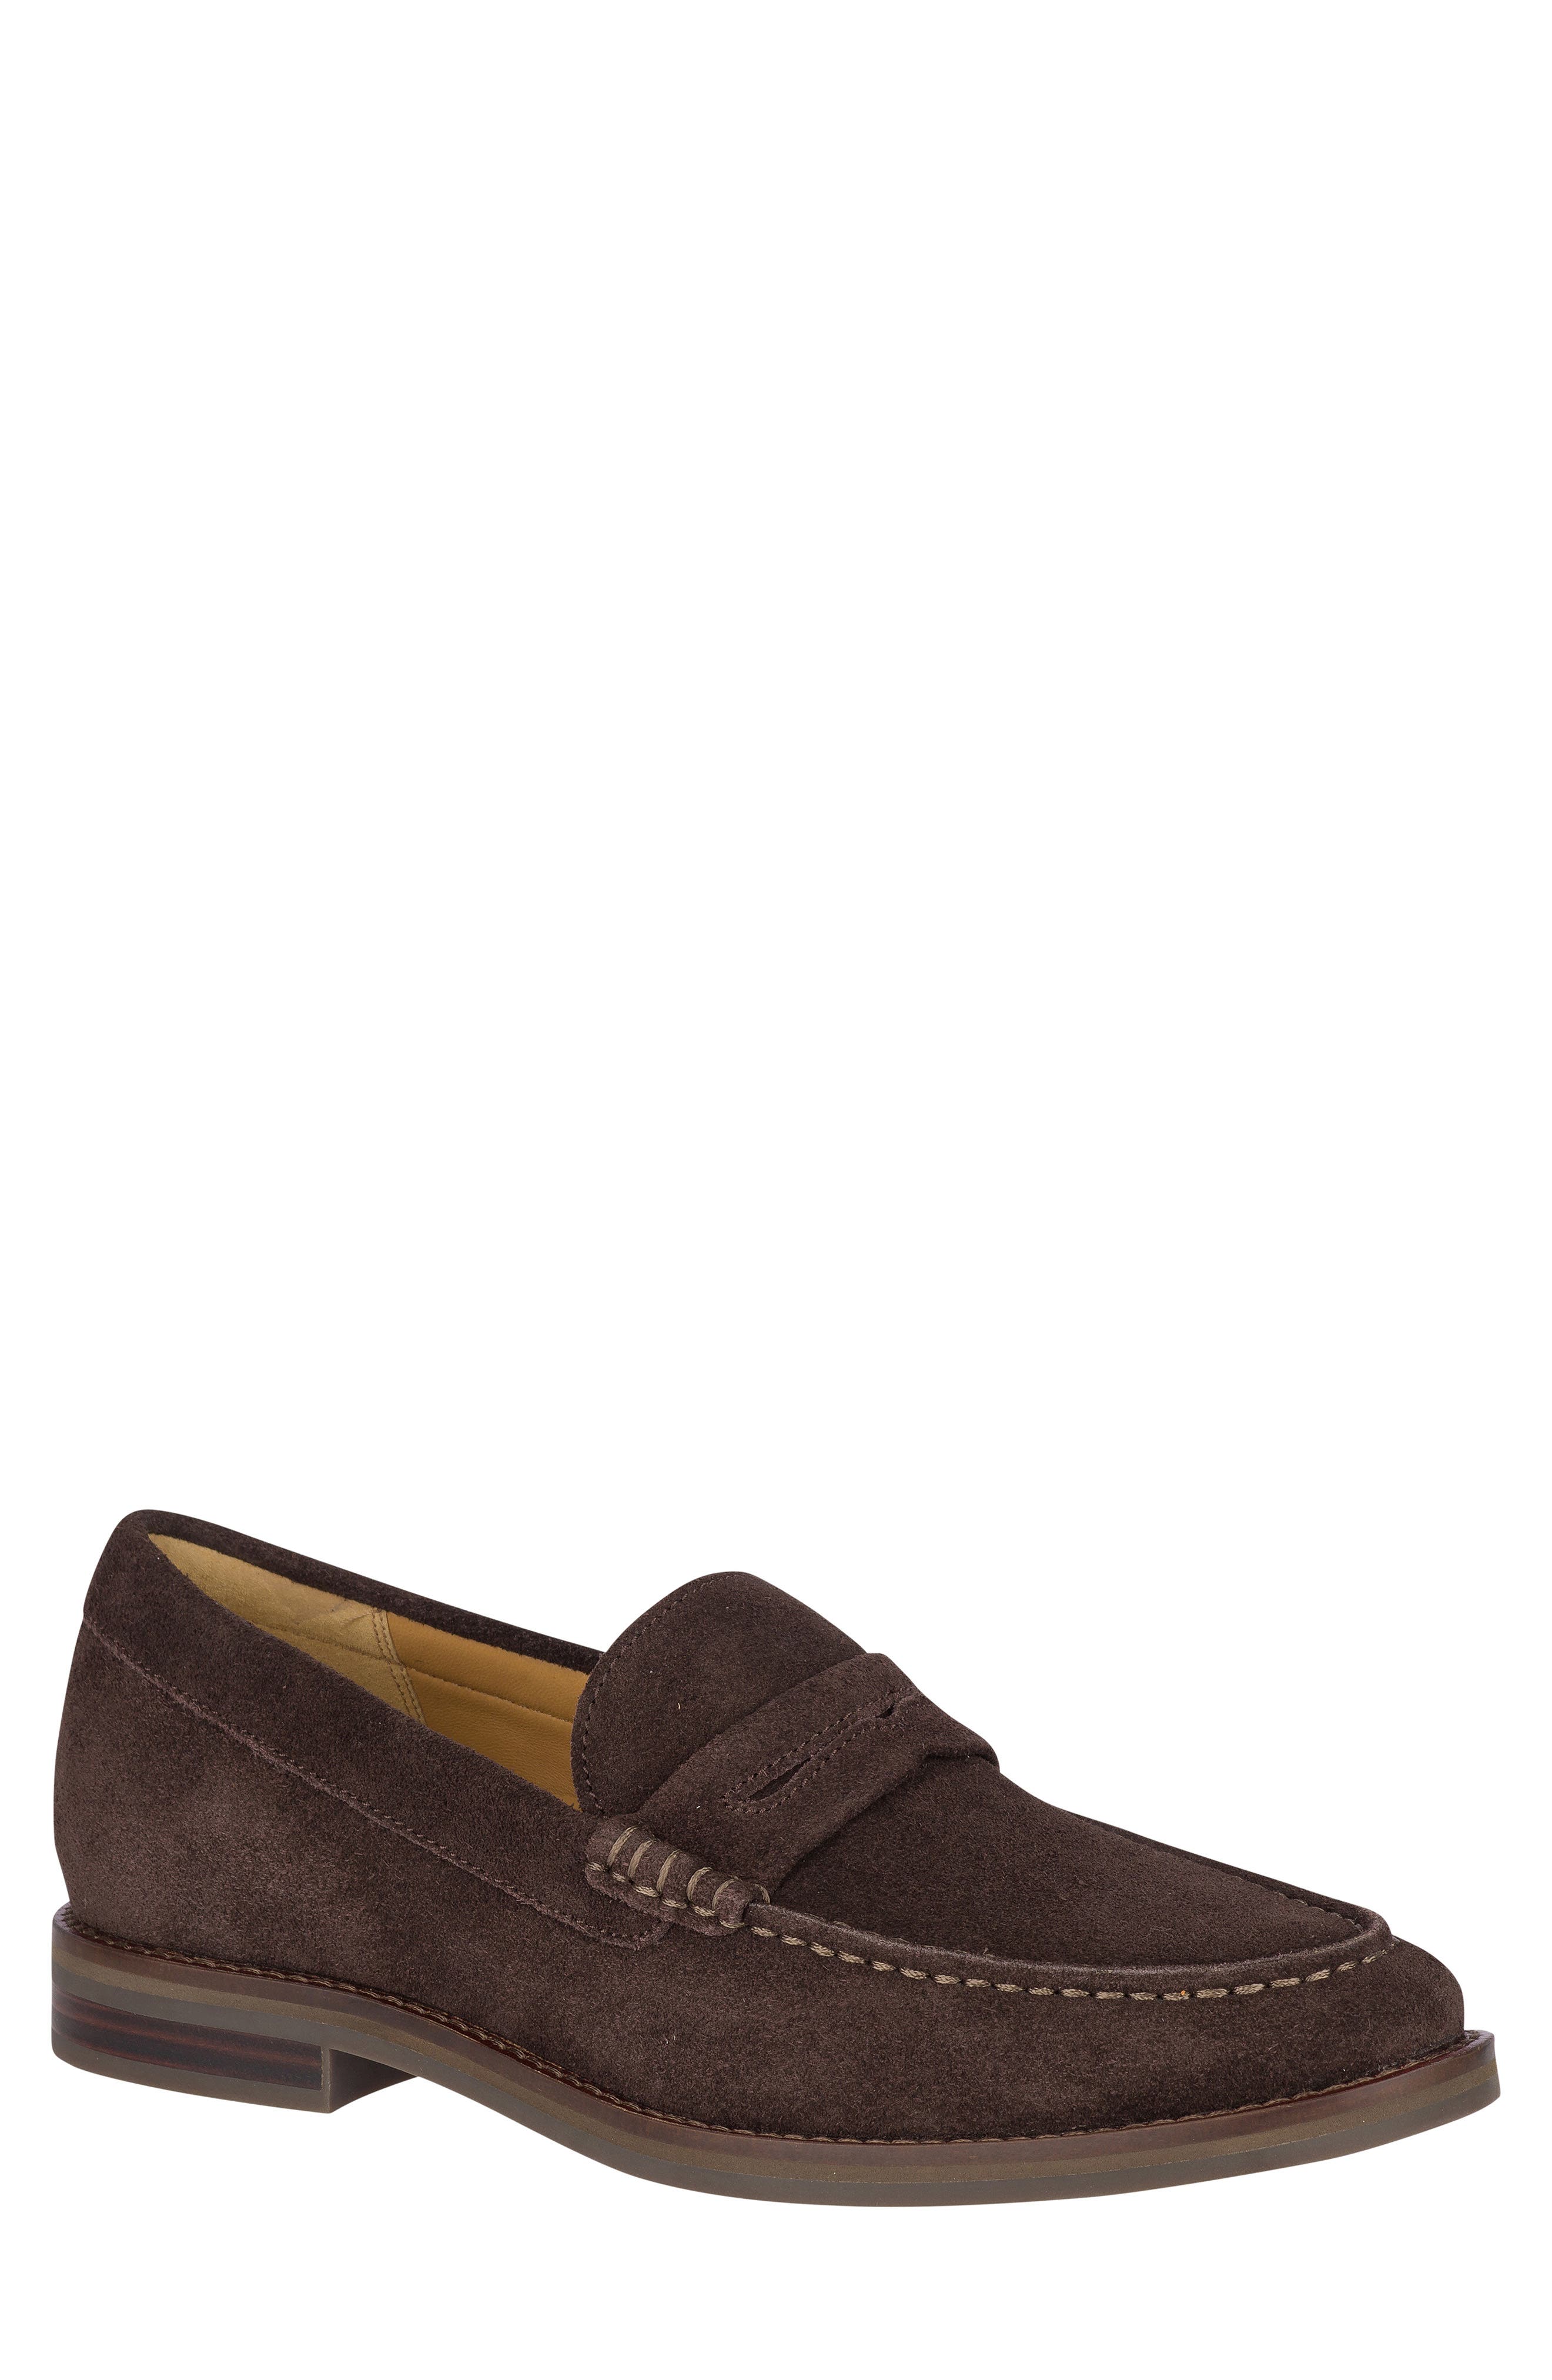 Gold Cup Exeter Suede Penny Loafer 